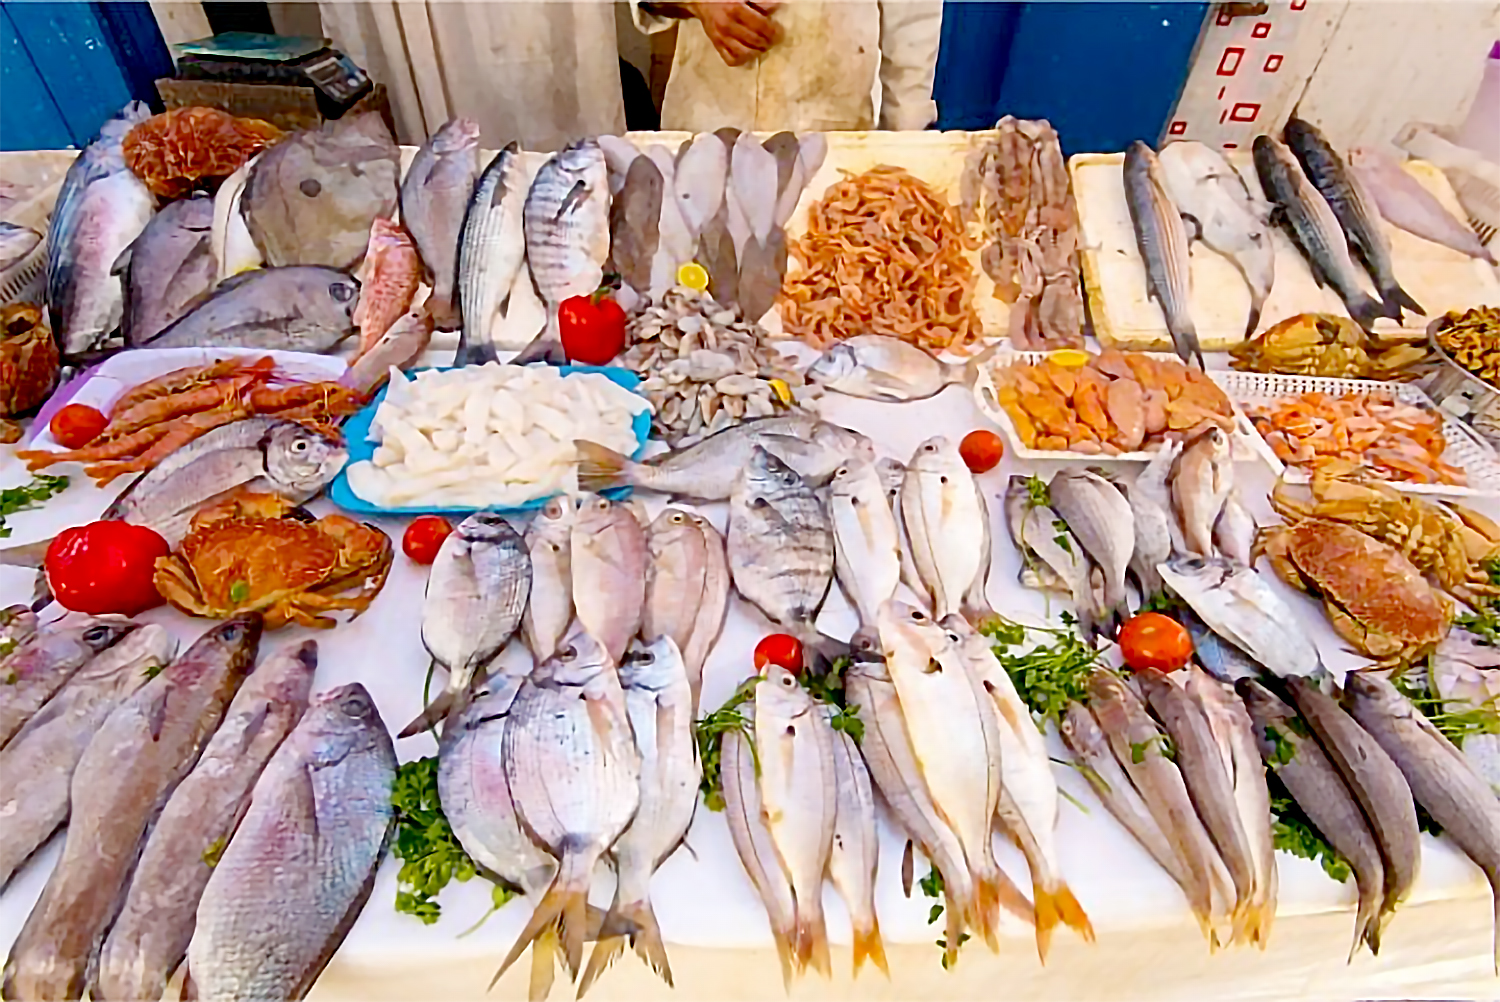 Morocco and The Basque Country Explore Investment Opportunities in the Fishing Sector